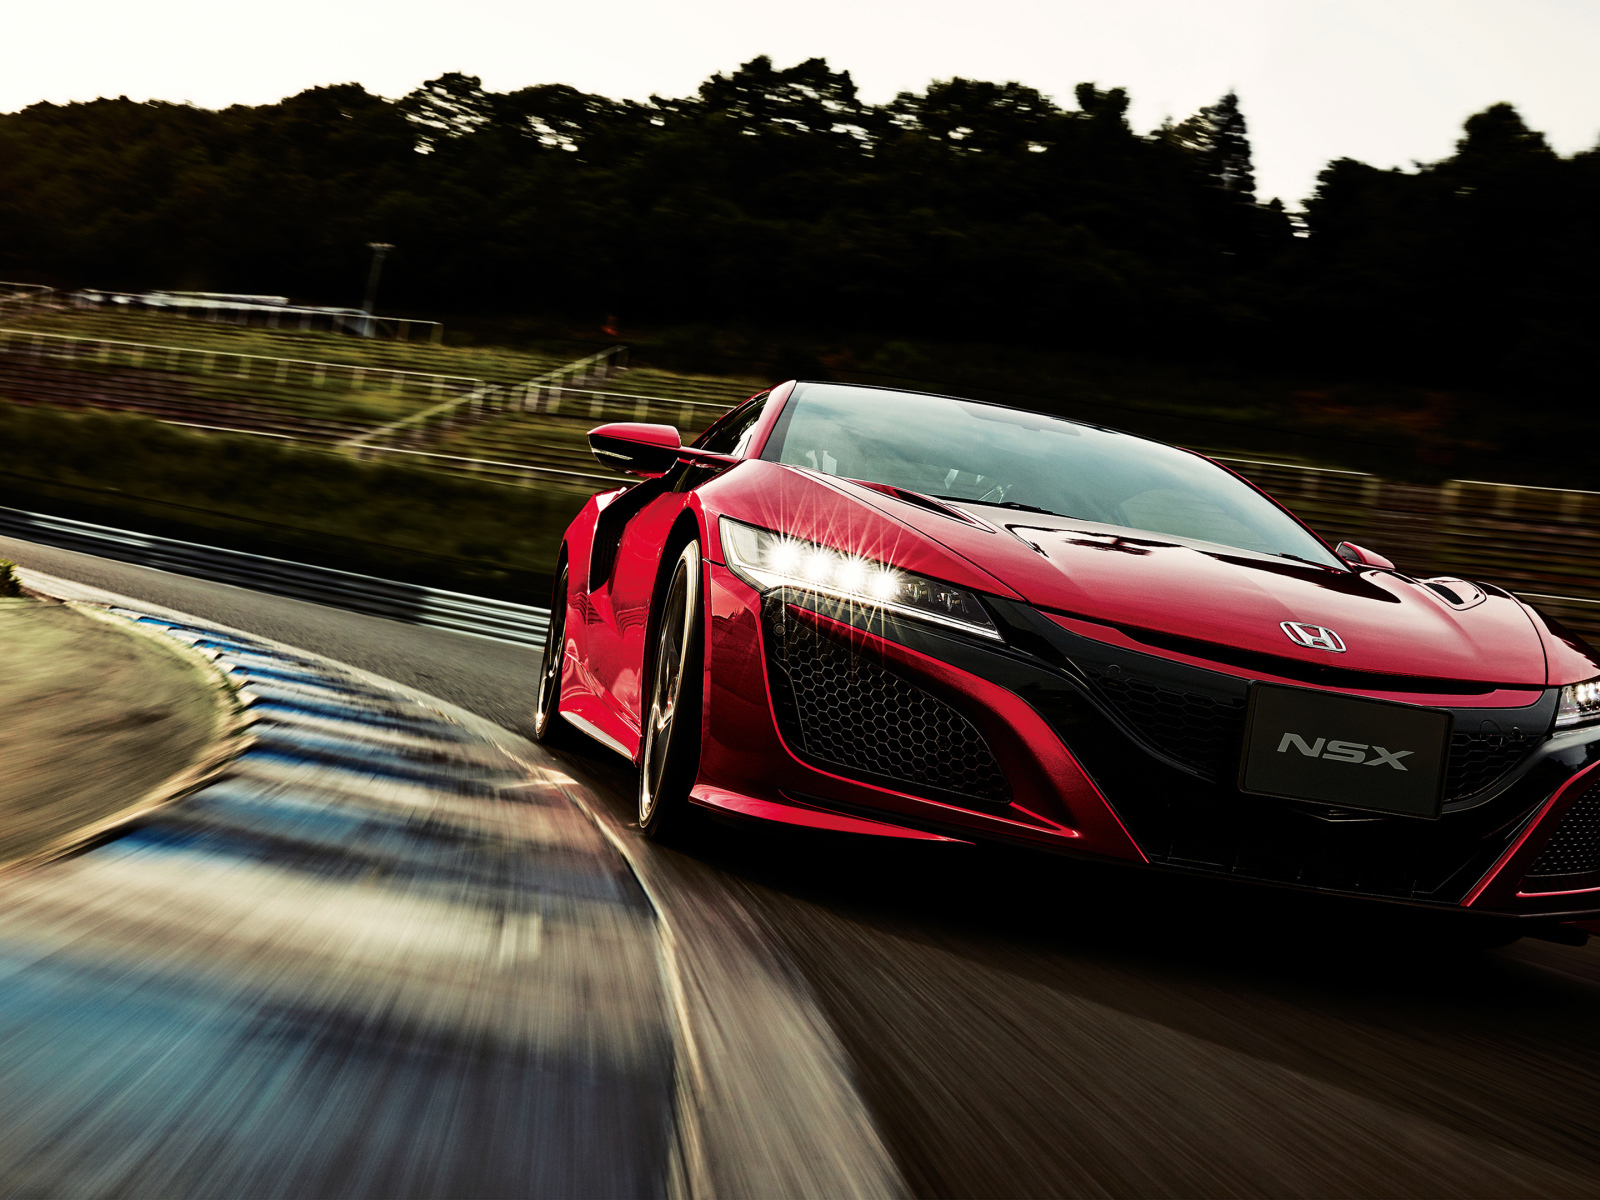 Red Honda NSX car on the track